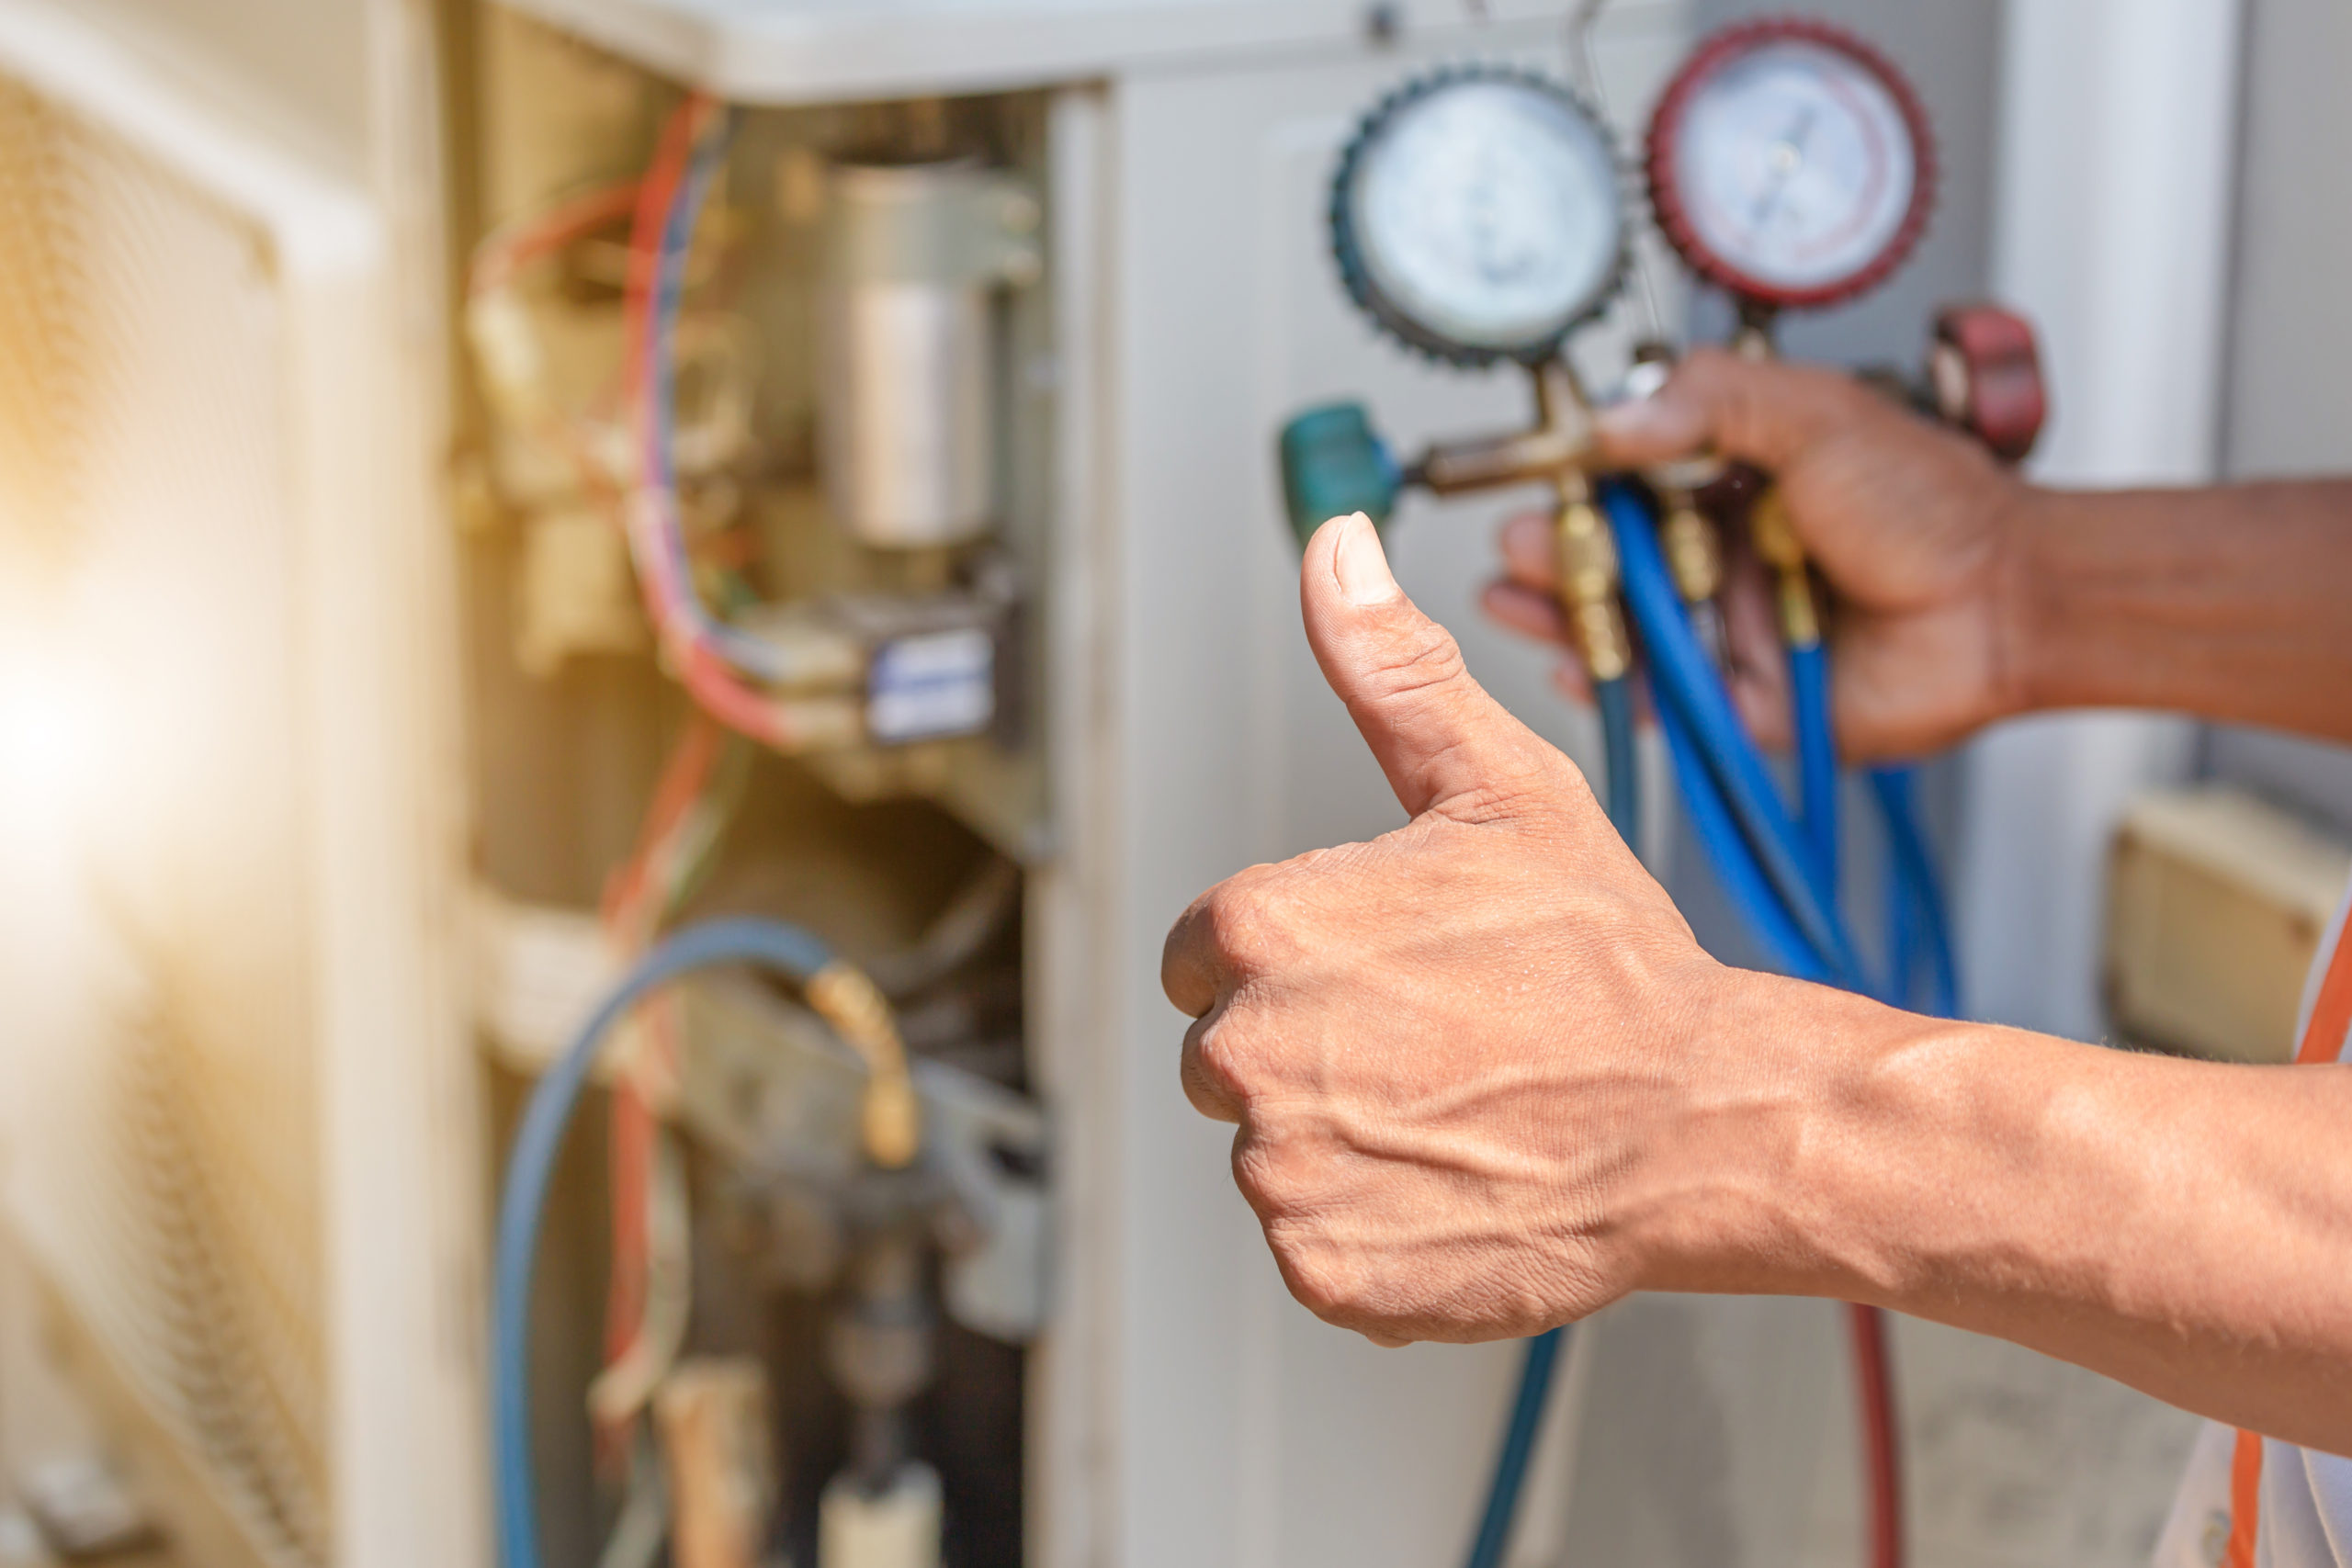 8 Reasons Why You Need Experts To Check Your HVAC System - Domesblissity.com